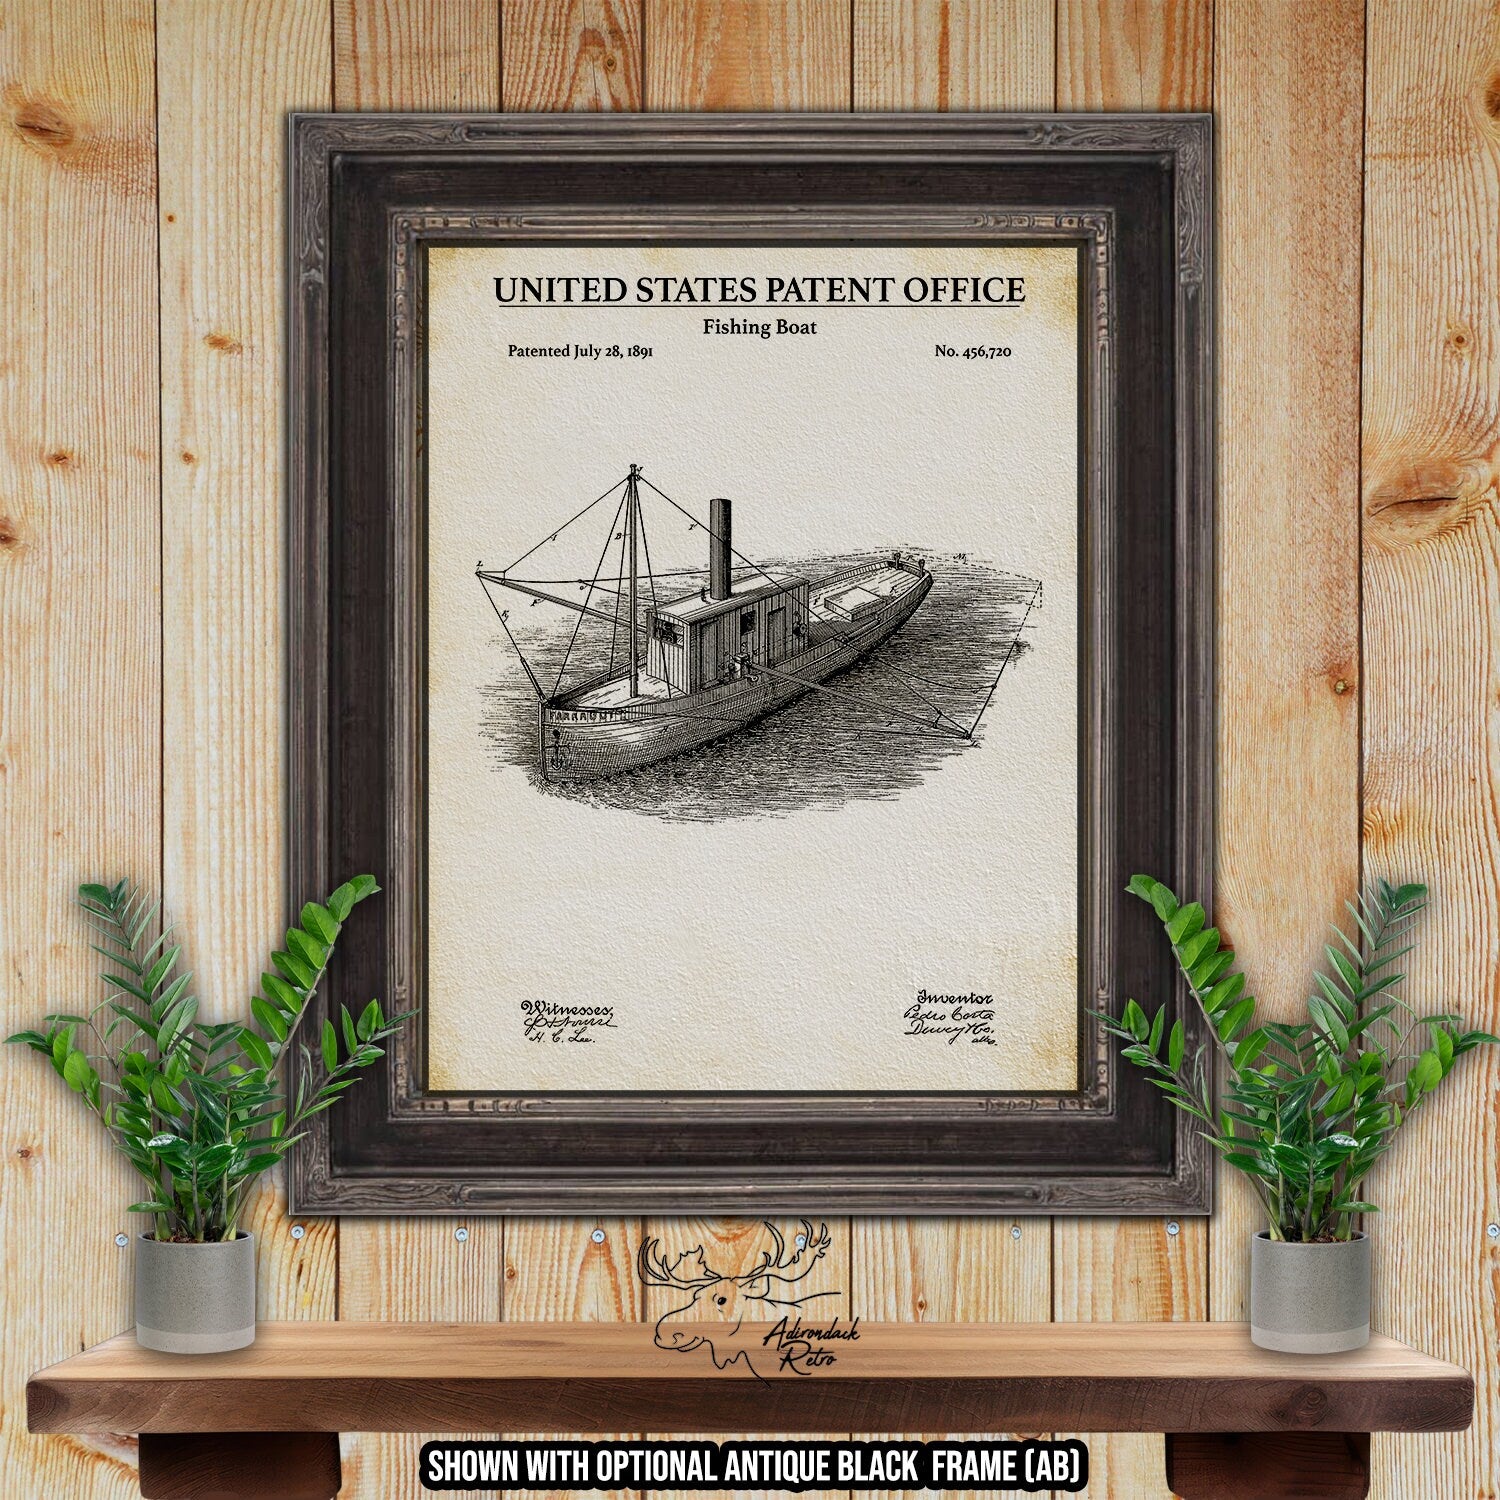 Commercial Fishing Boat Patent Print - 1891 Fishing Invention at Adirondack Retro